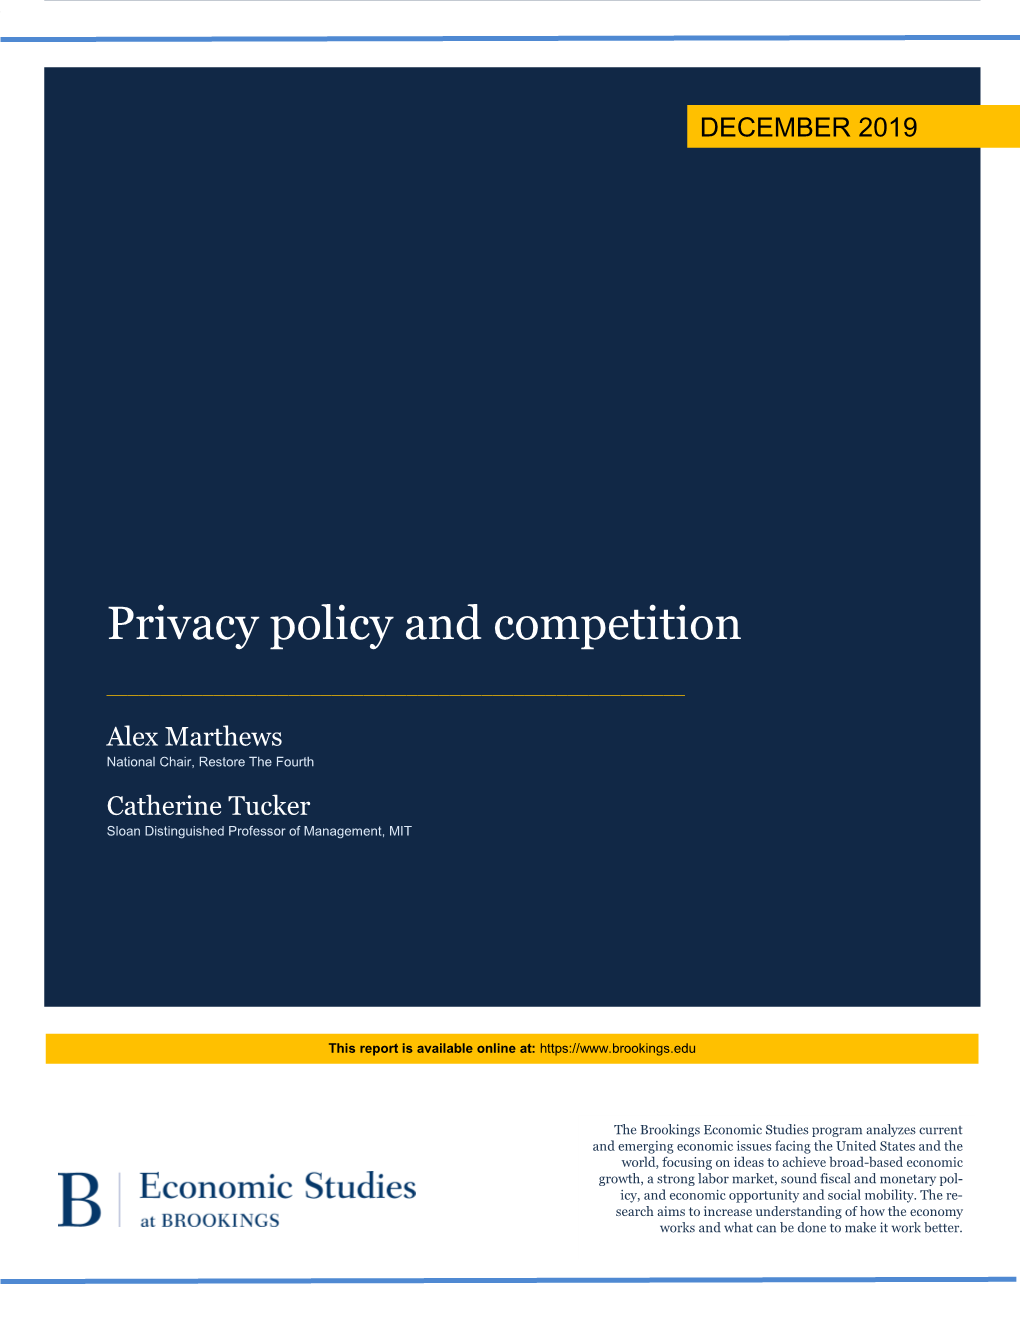 Privacy Policy and Competition